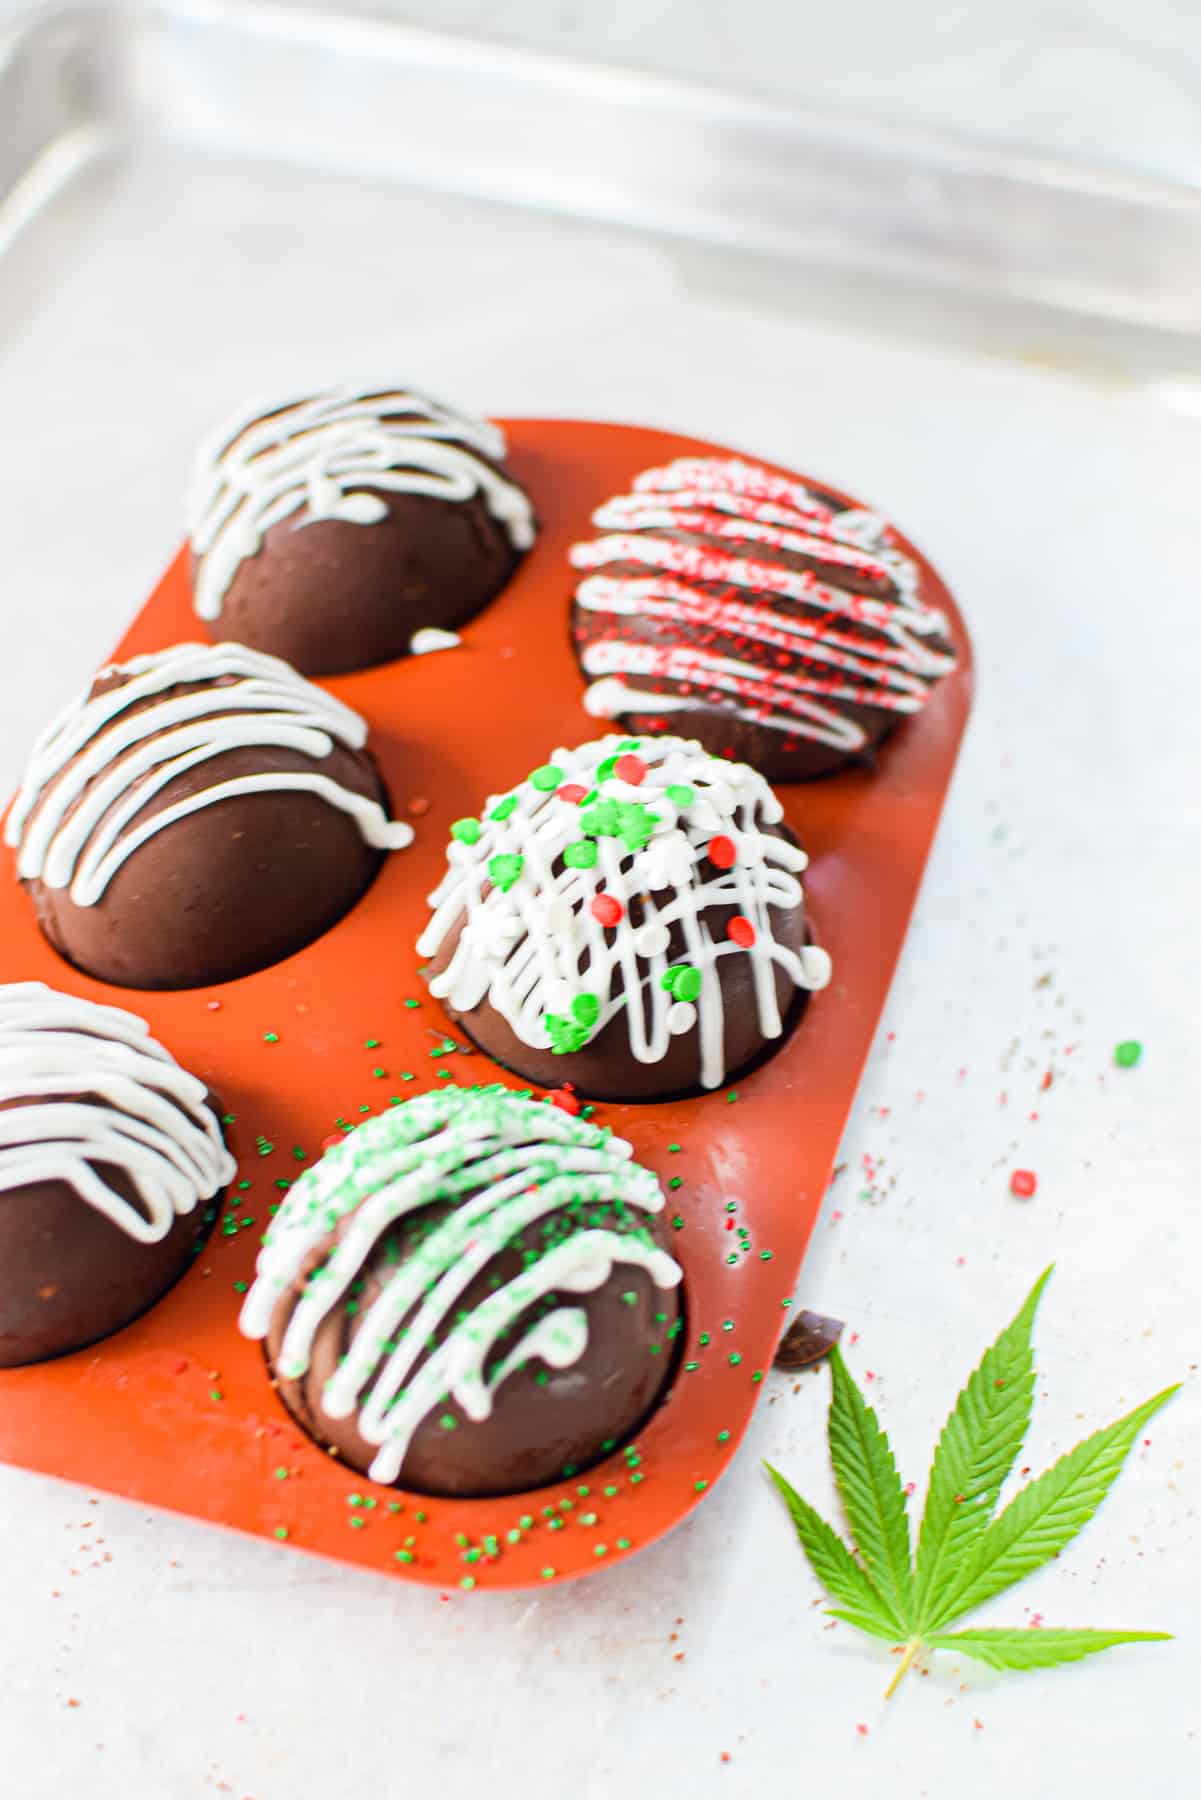 A parchment lined baking sheet with a mold full of completed hot chocolate bombs garnished with white chocolate and sprinkles, with a cannabis leaf on the side